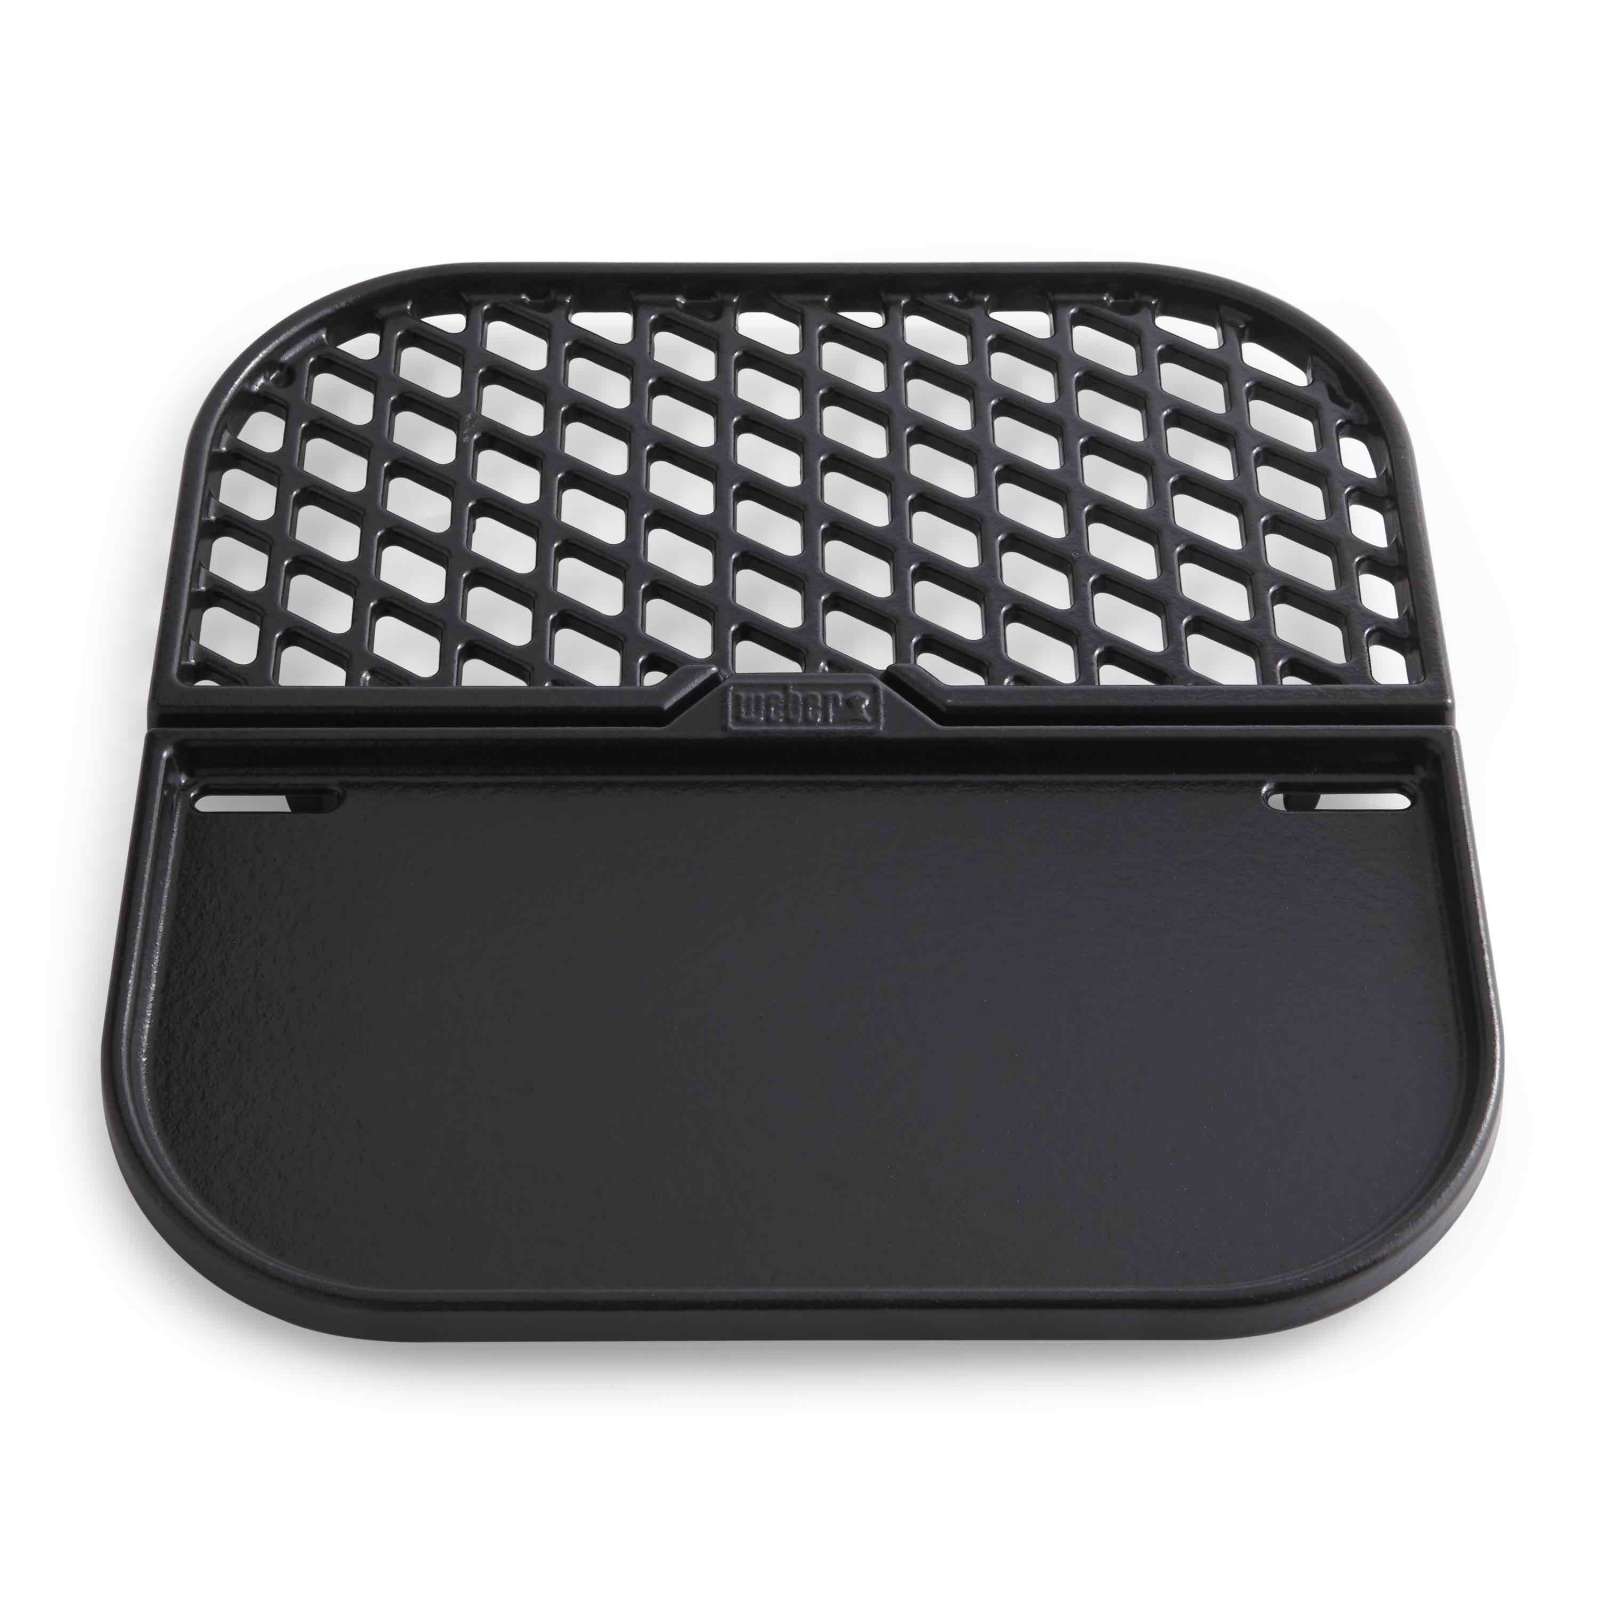 Weber CRAFTED 2 in 1 Sear Grate & Grillplatte - Gourmet BBQ System